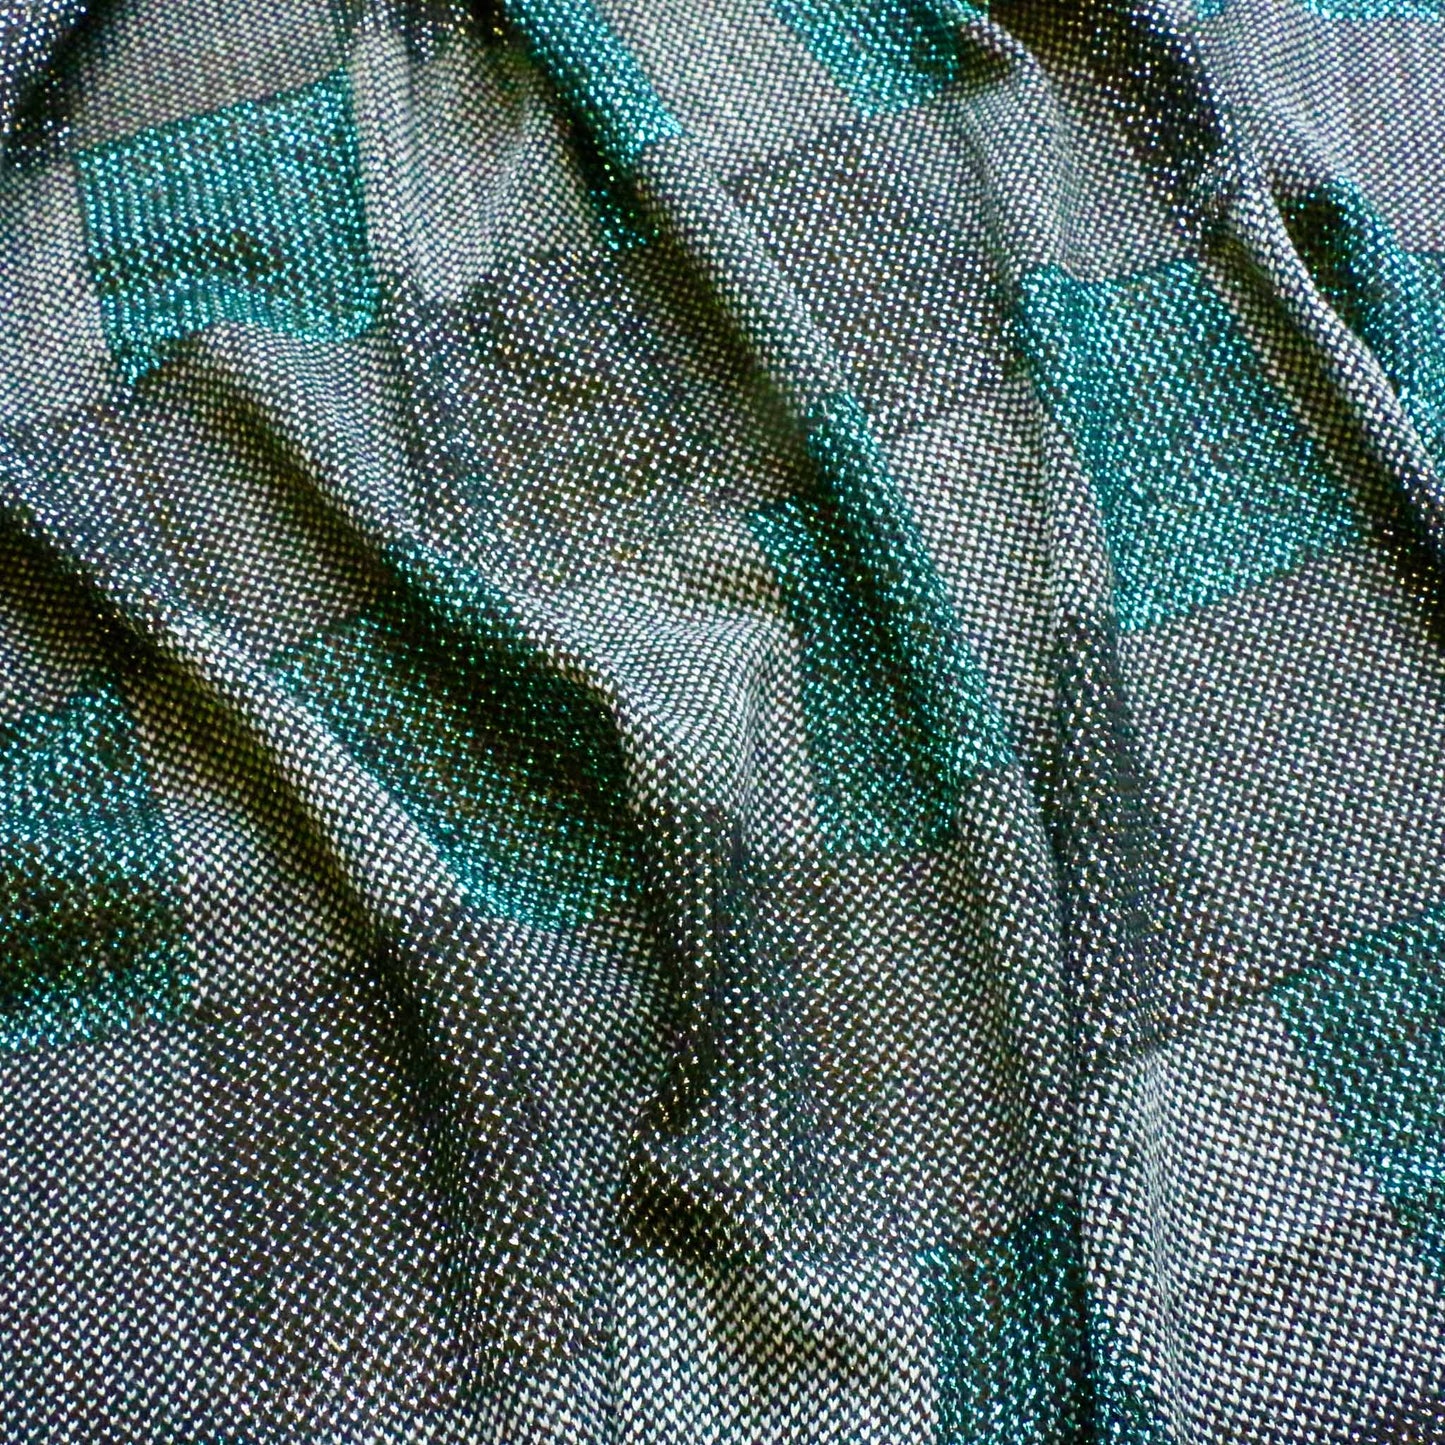 turquoise and black jersey knit dressmaking fabric with check design